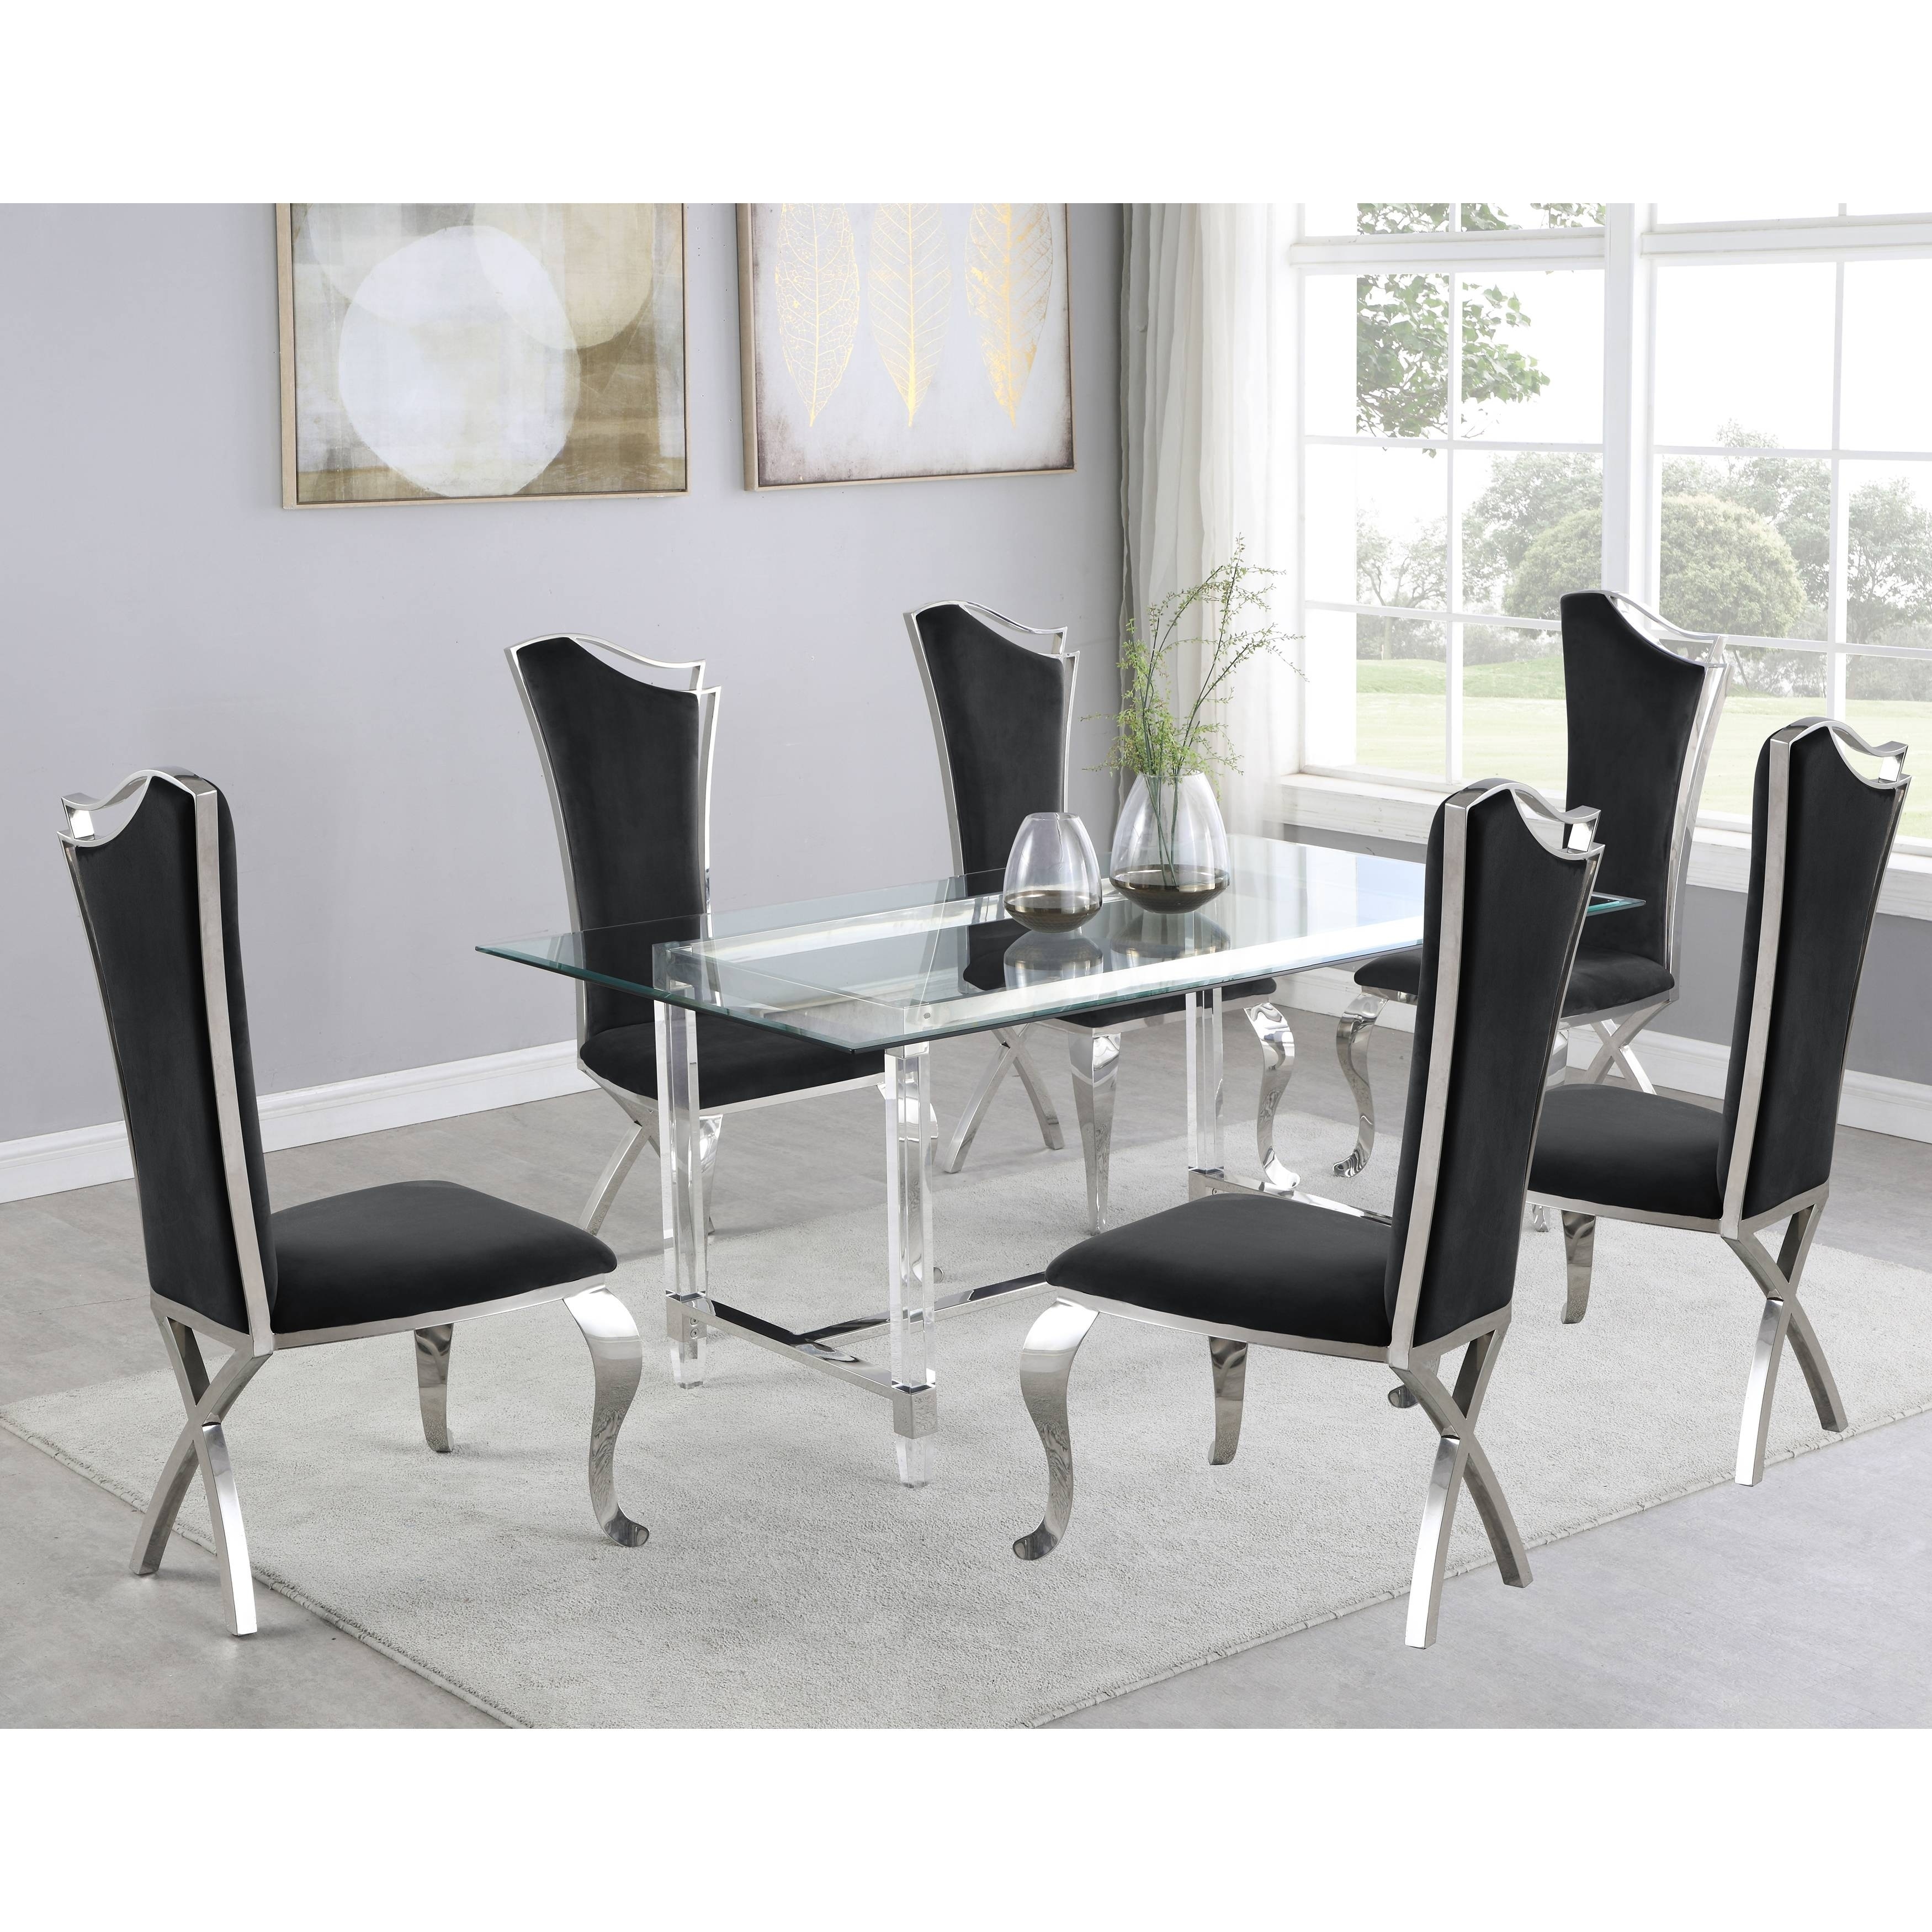 Best Quality Furniture Dining Set With Luxe Upholstered Dining Accent Chairs On Sale Overstock 30833435